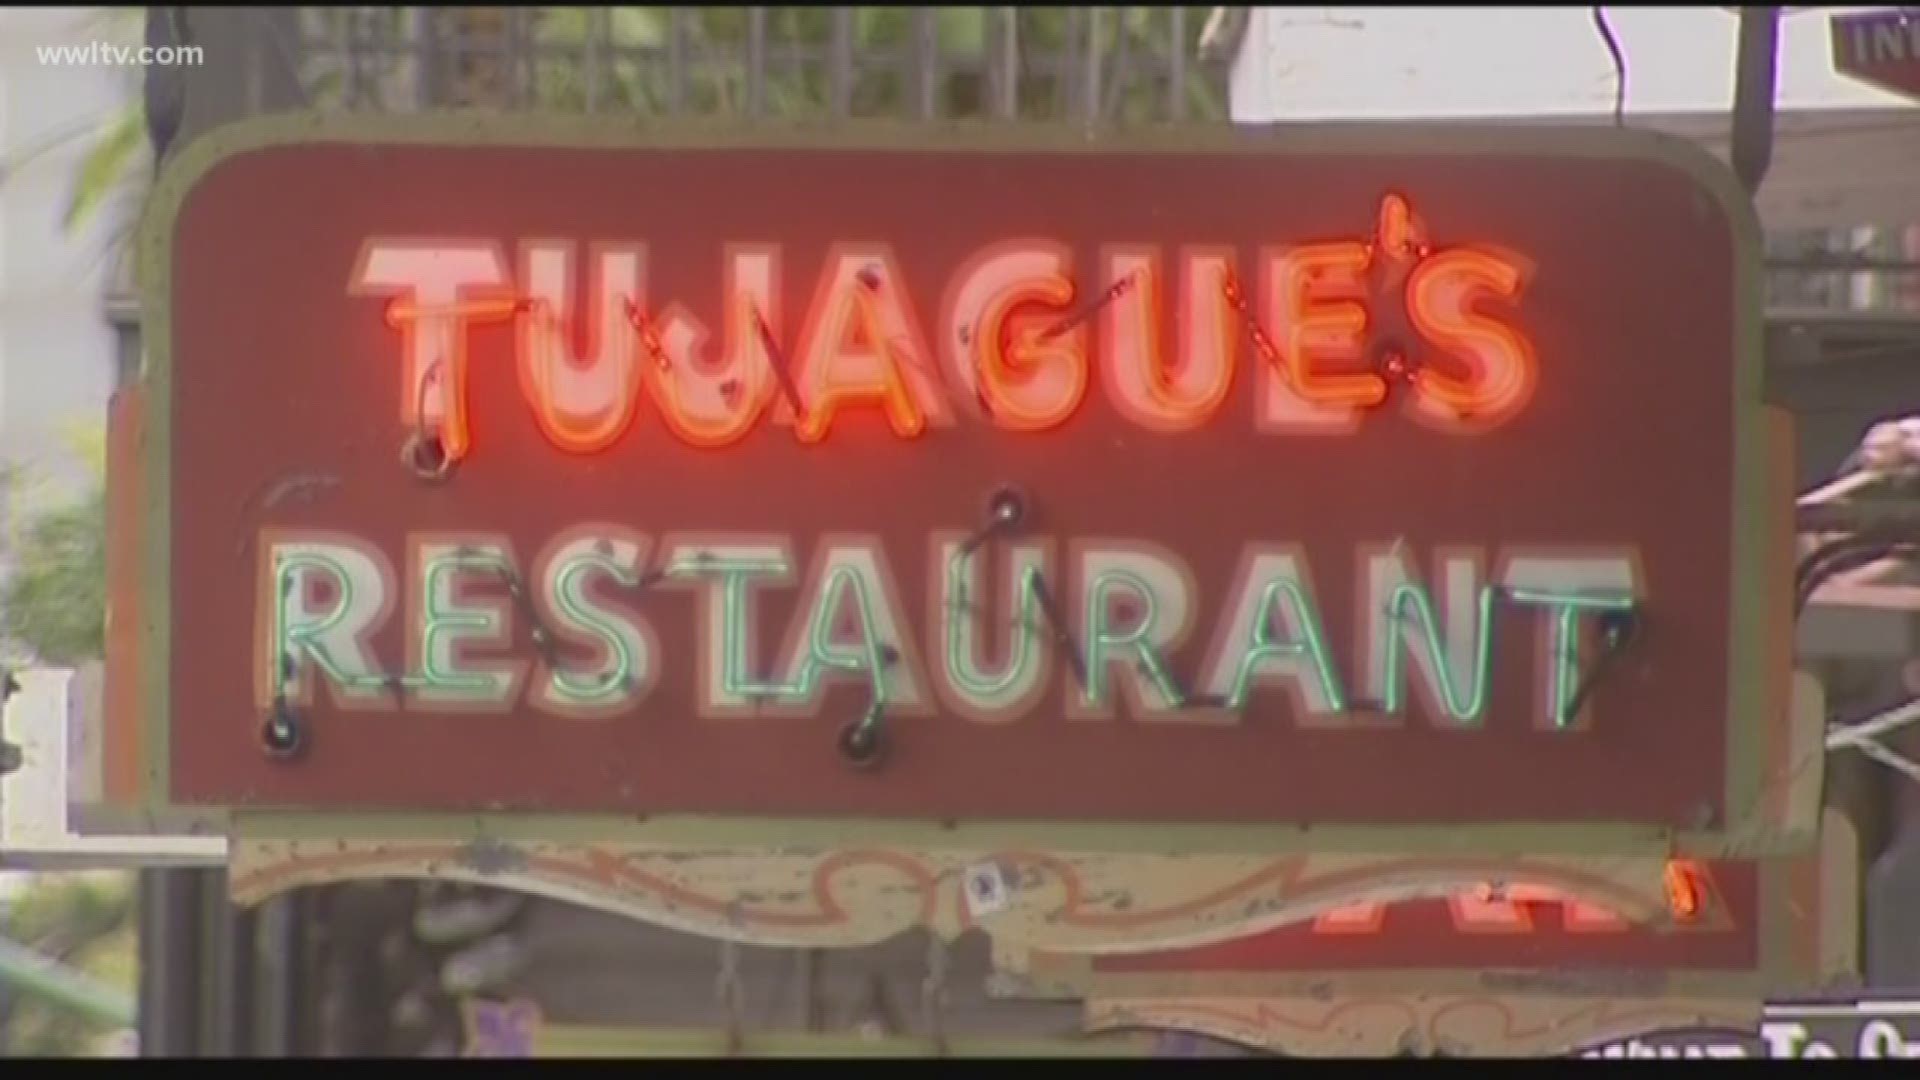 The second-oldest restaurant in New Orleans will soon relocate to a new building.